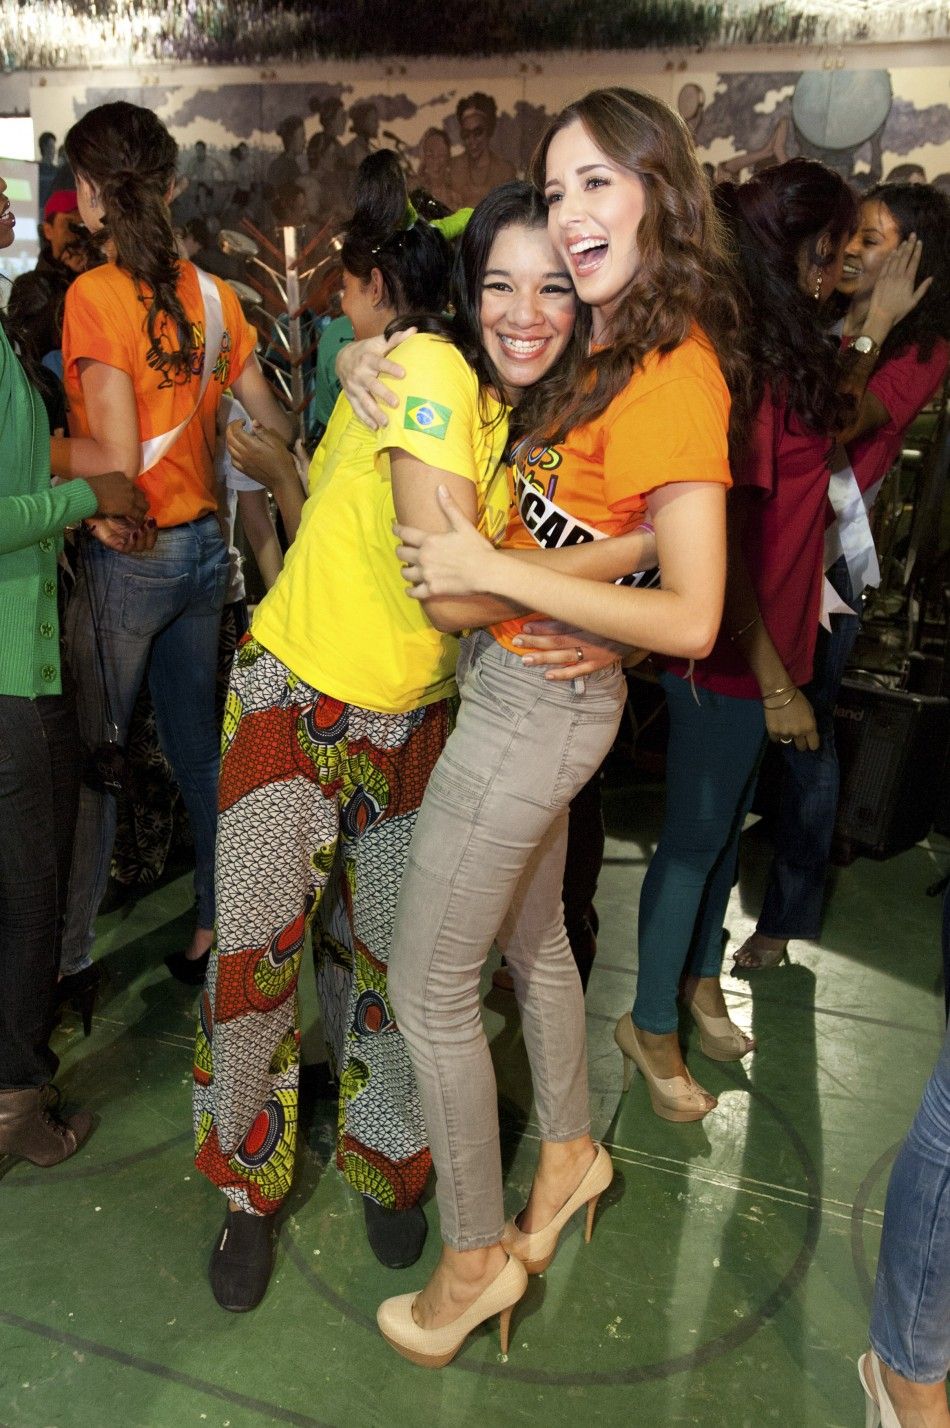 Miss Nicaragua Adriana Dom hugs a girl after joining dancers in a performance at Meninos do Morumbi social project in Sao Paulo 